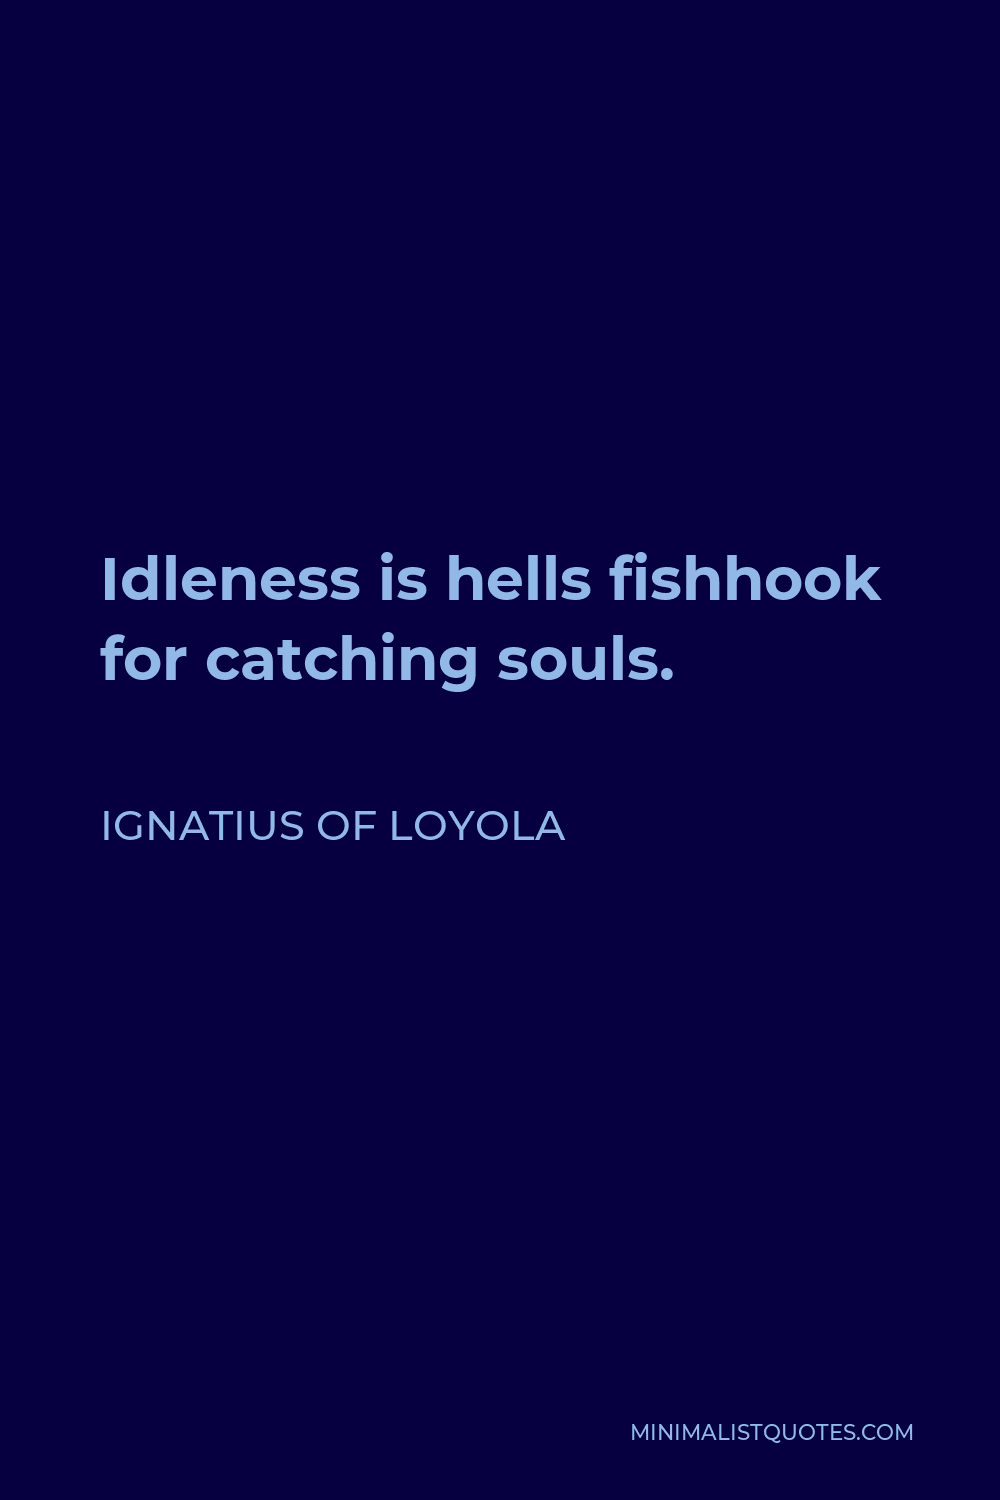 Ignatius of Loyola Quote - Idleness is hells fishhook for catching souls.